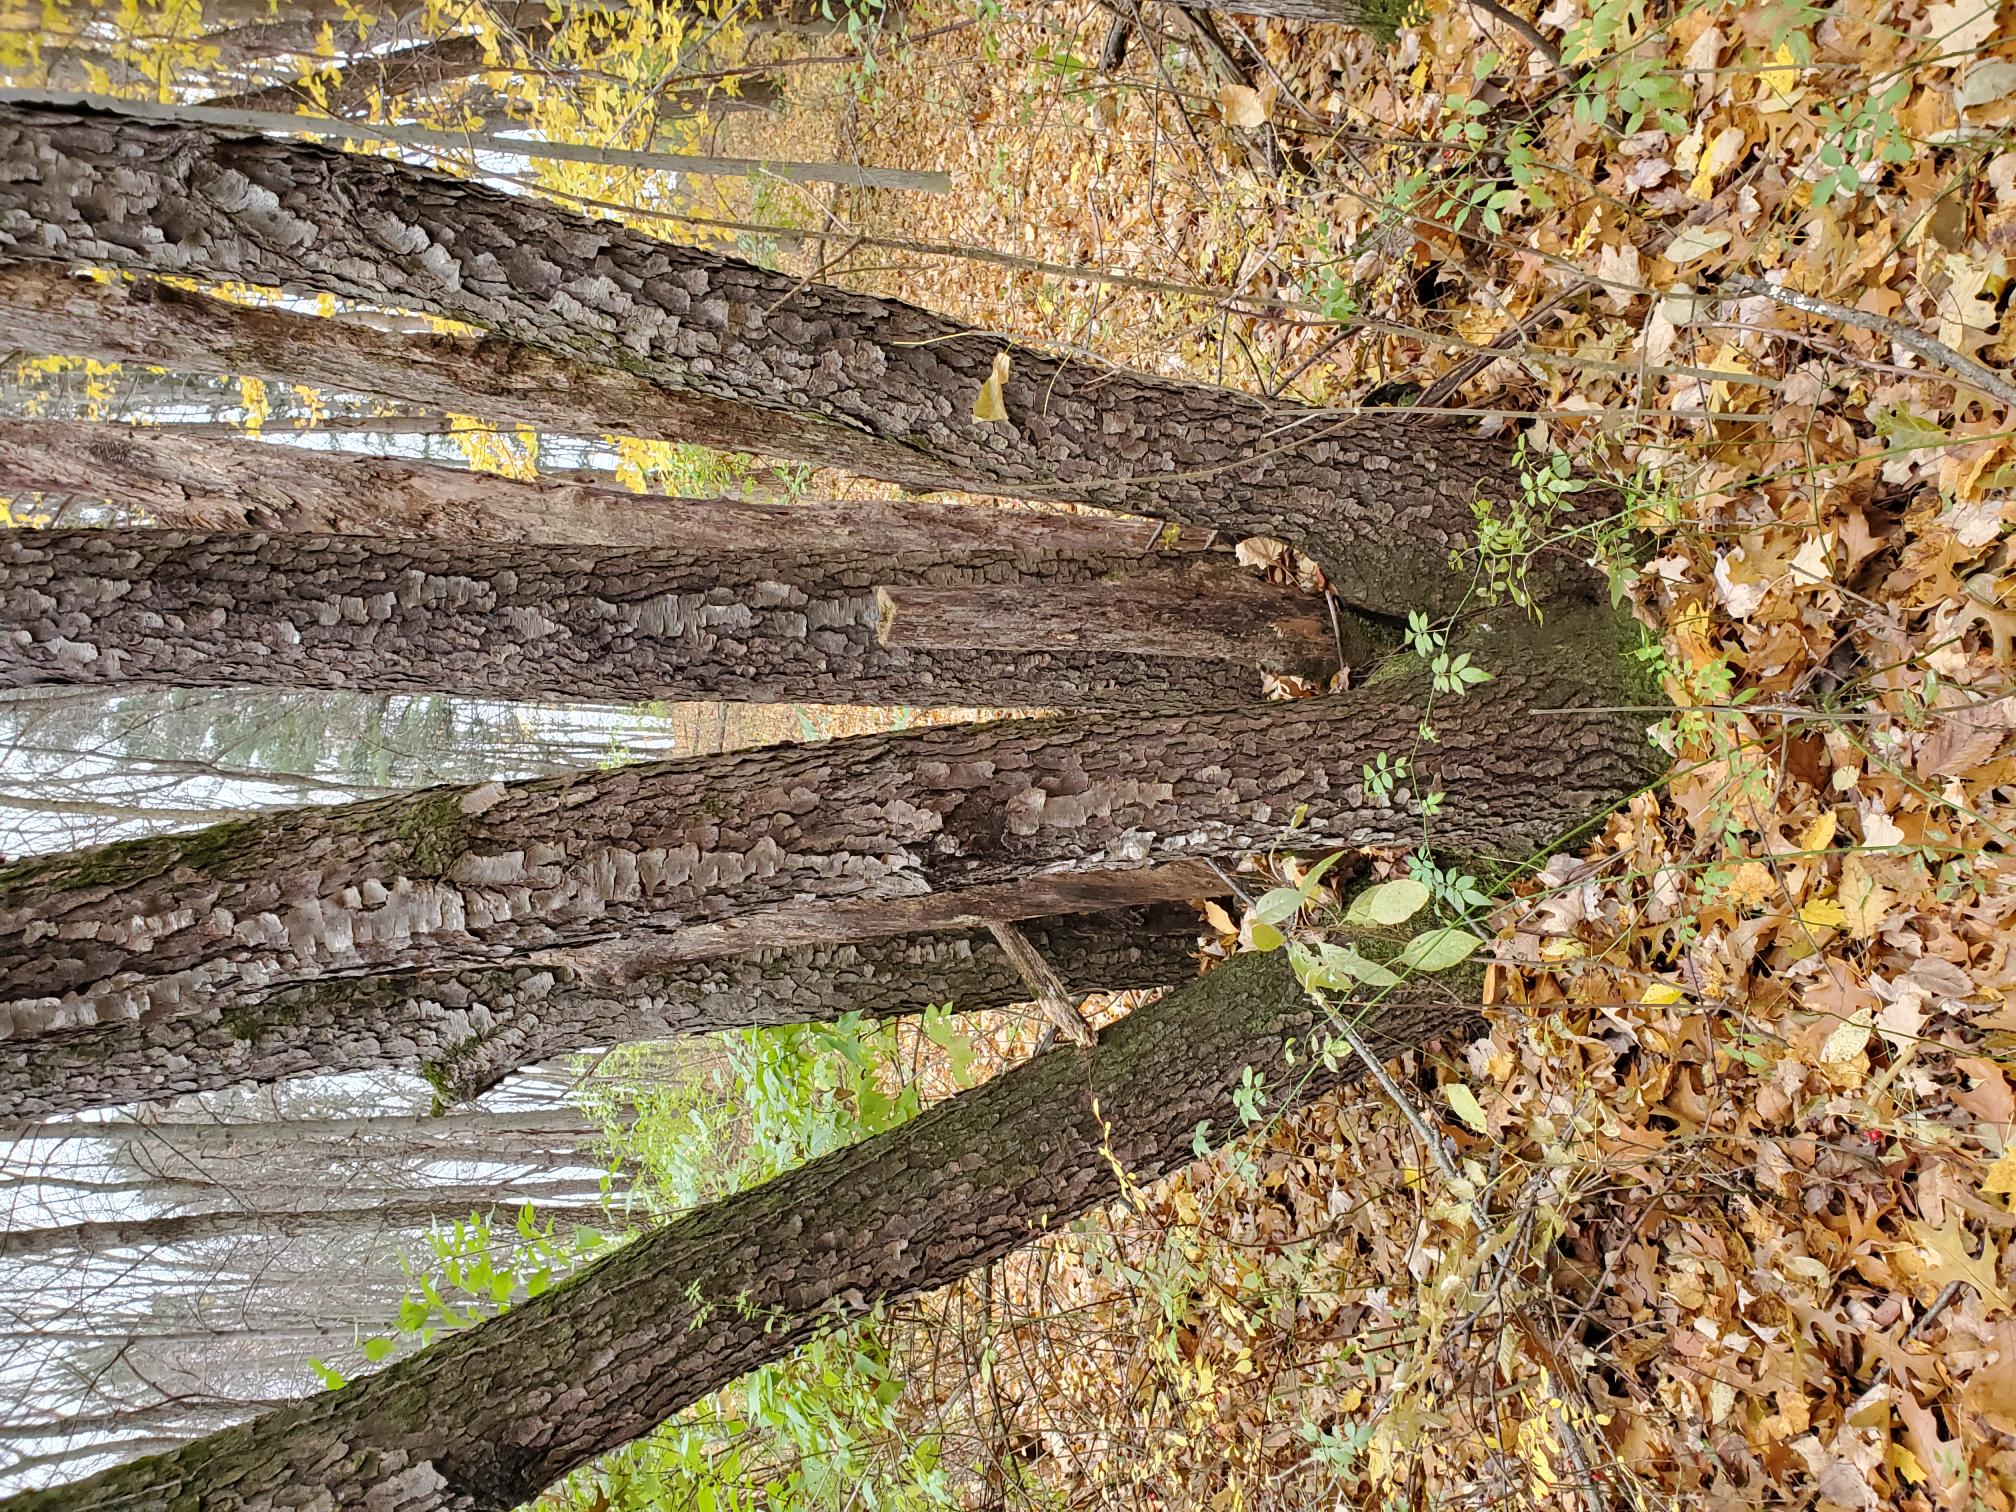 Stump sprout tree example in fall woods.